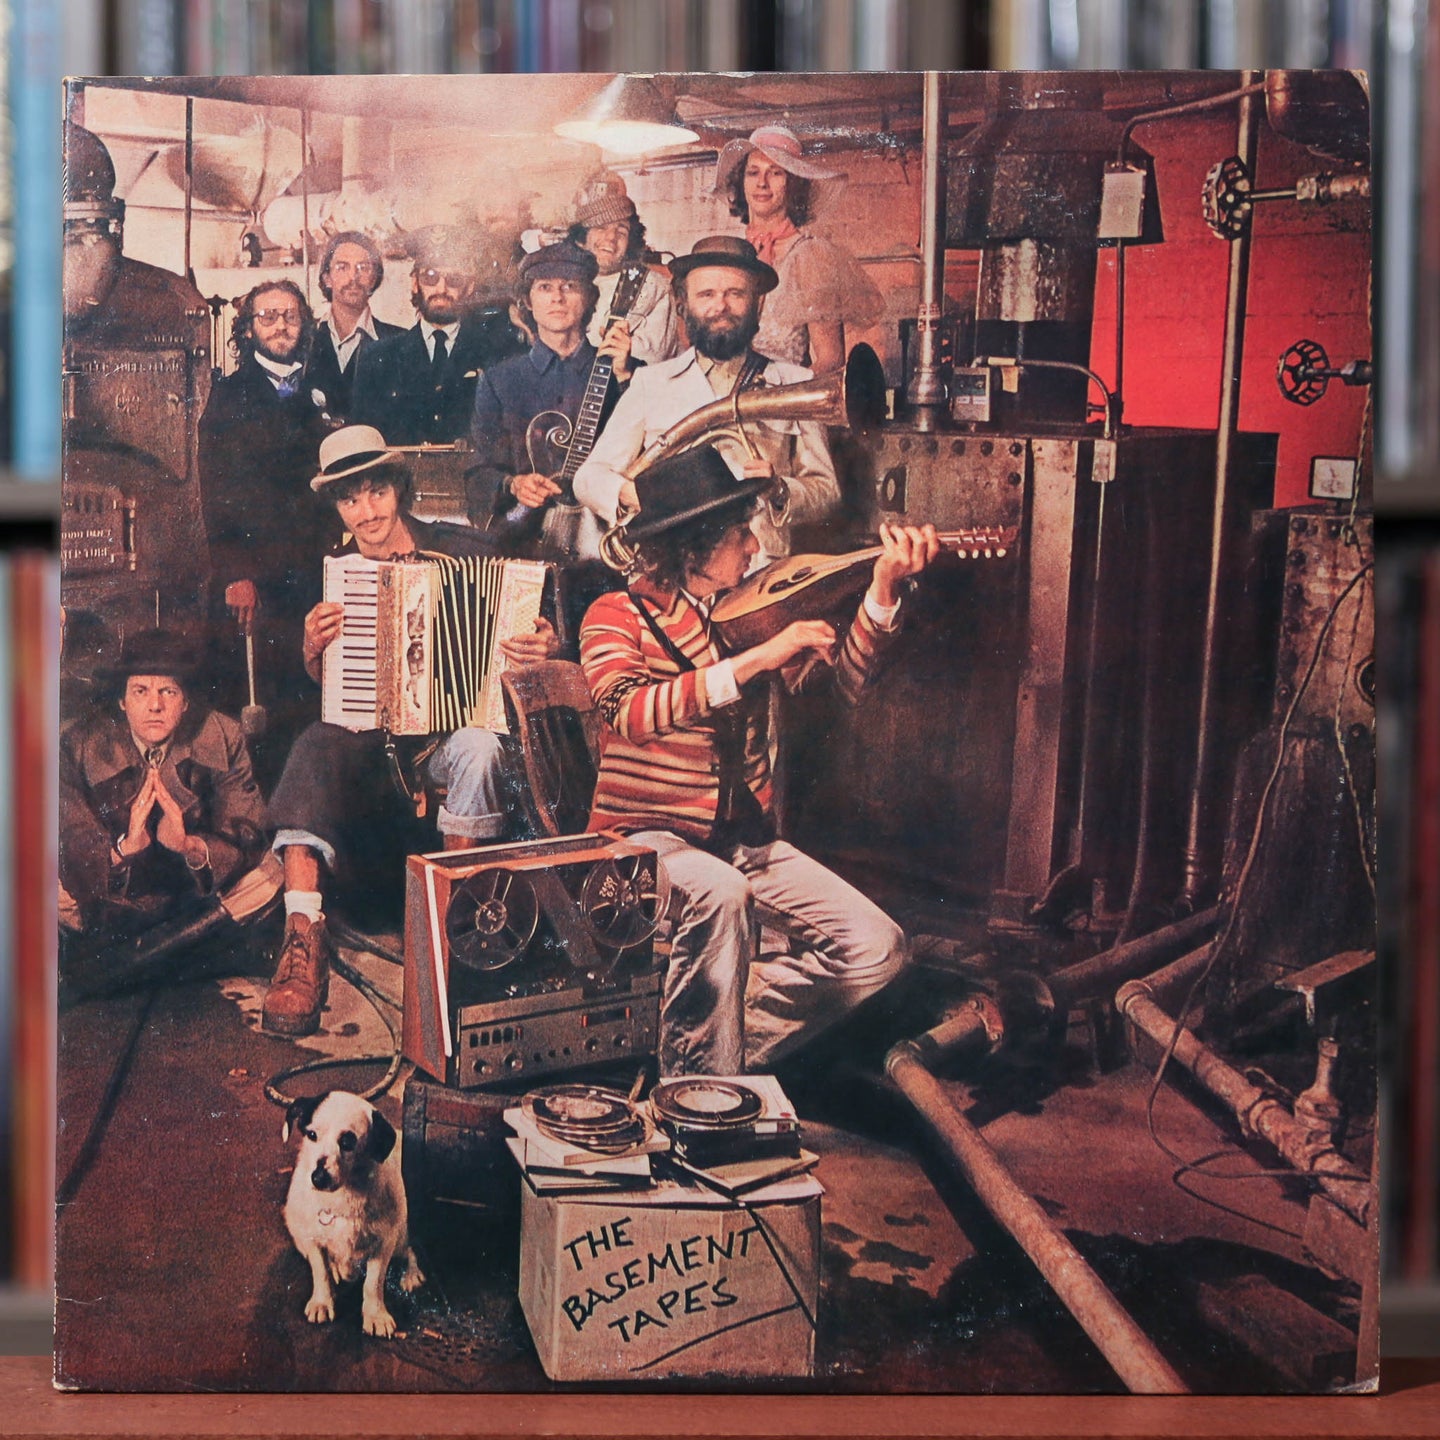 Bob Dylan And The Band - The Basement Tapes - 2LP - 1975 Columbia, VG+/VG